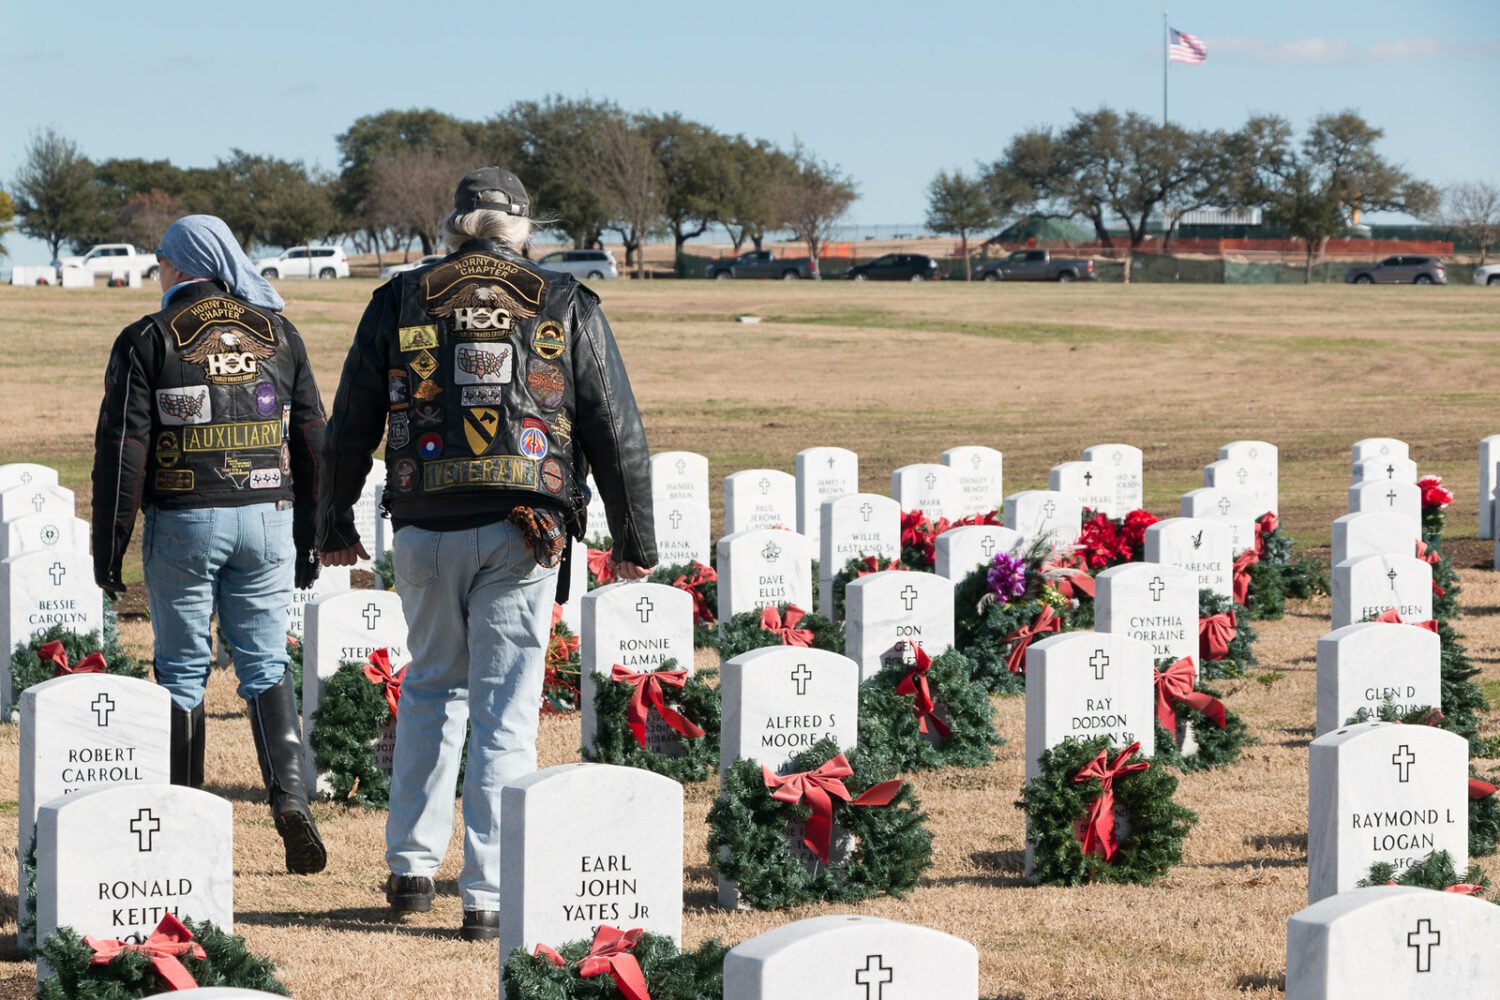 A Texas Subaru dealership has made a large donation to support the annual wreath-laying ceremony at a local veterans cemetery.